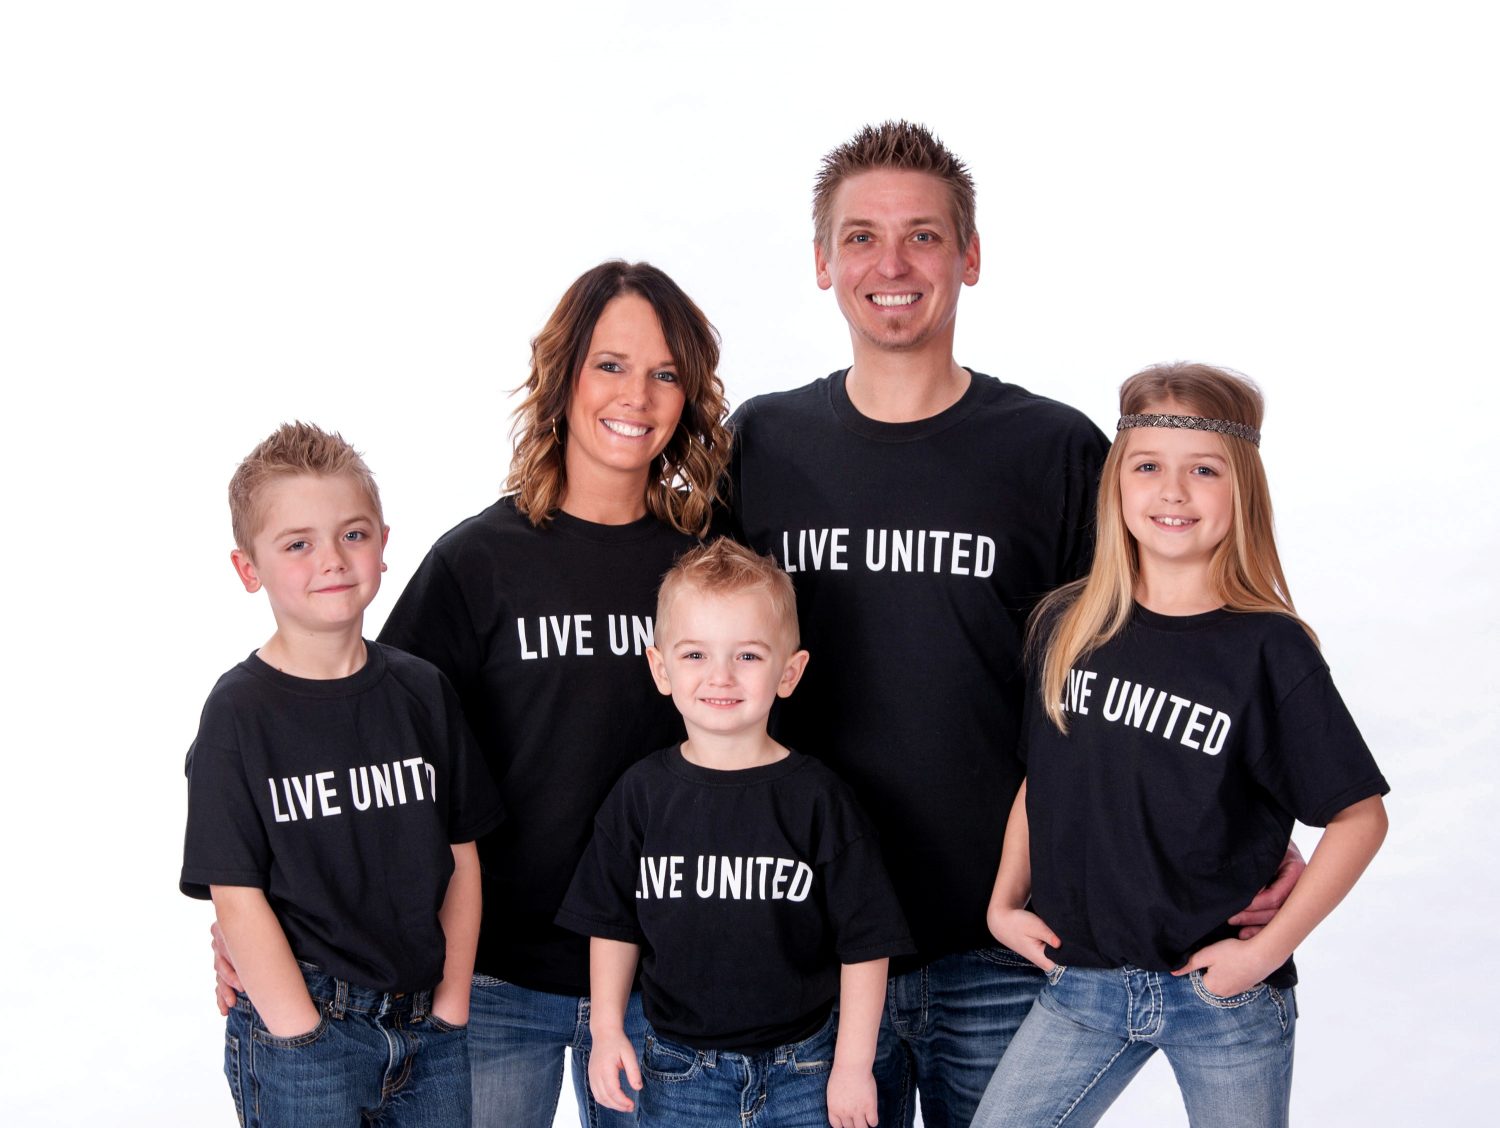 Pictured are Jay and Jill Holm and their children (from left) Max, Madden, and McKenzie.